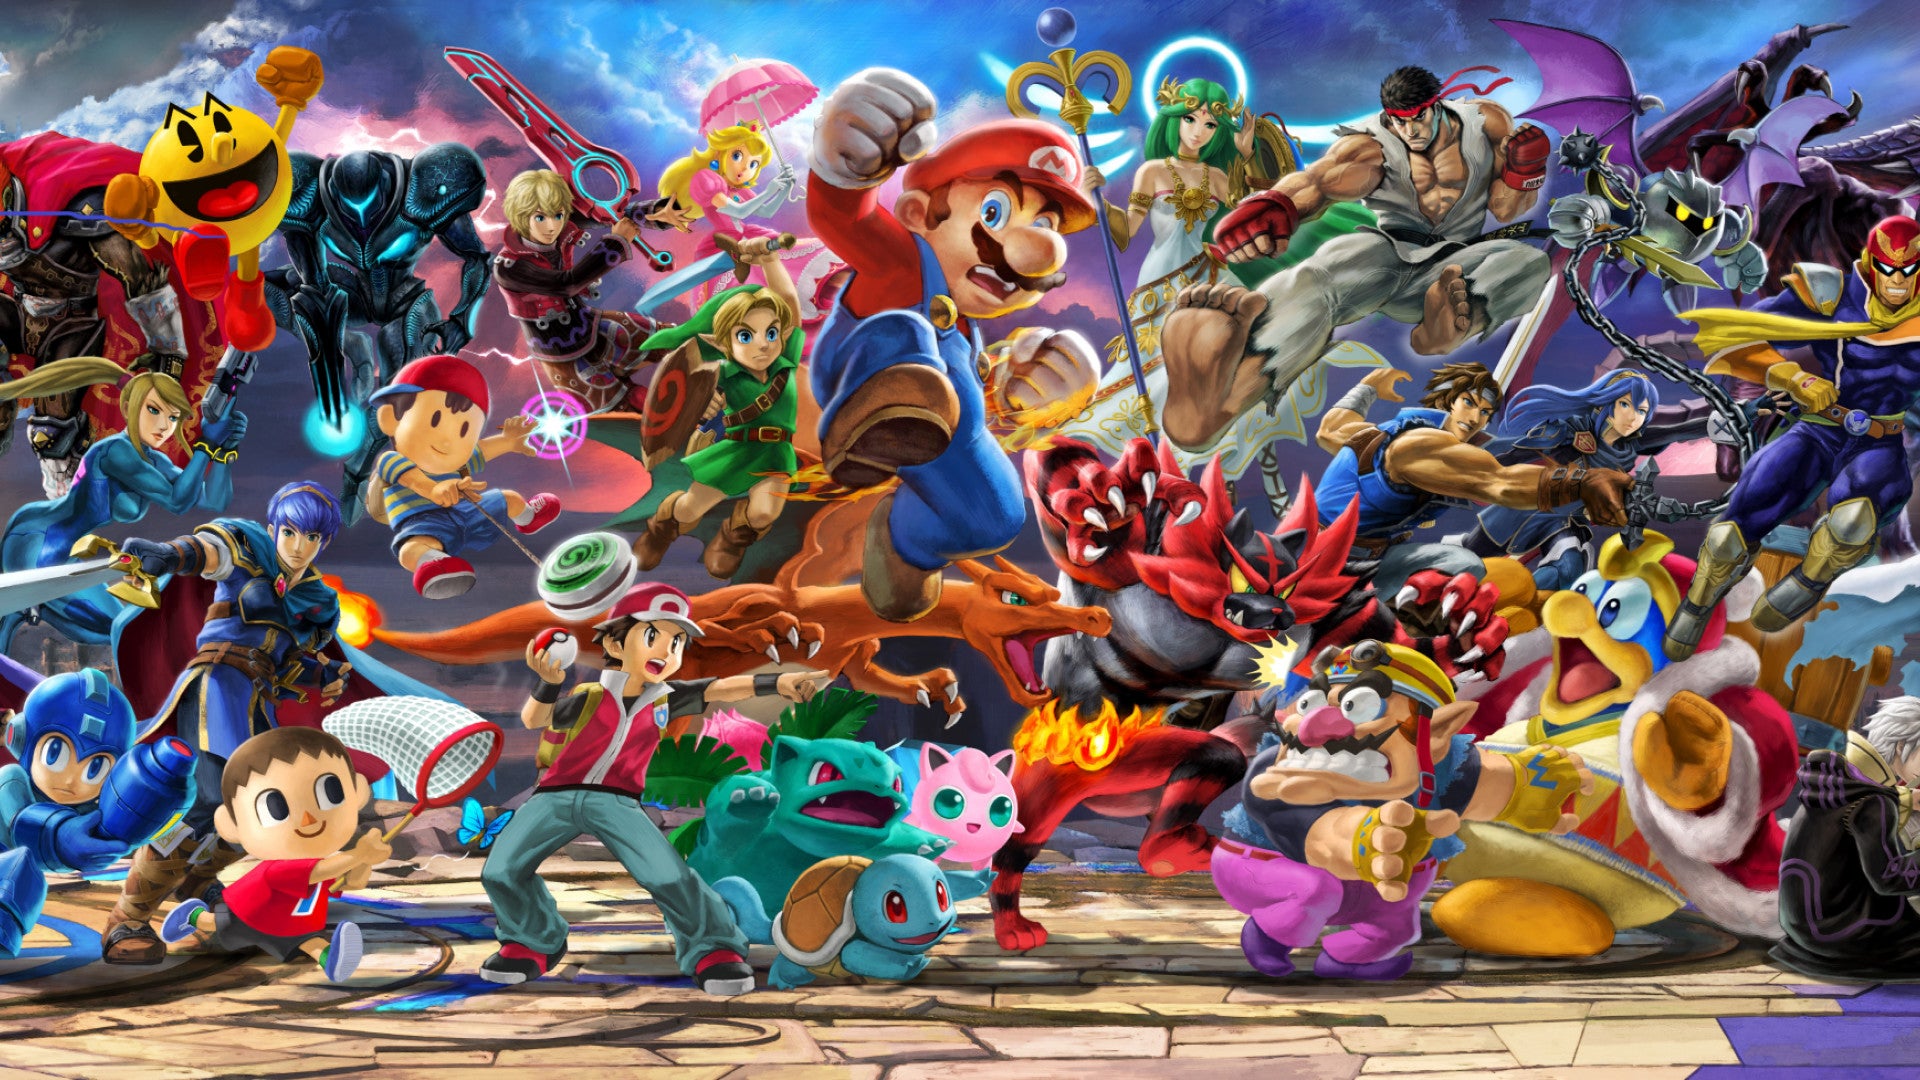 Image for The world record for longest amount of time consecutively playing Smash Bros. is officially 69 hours